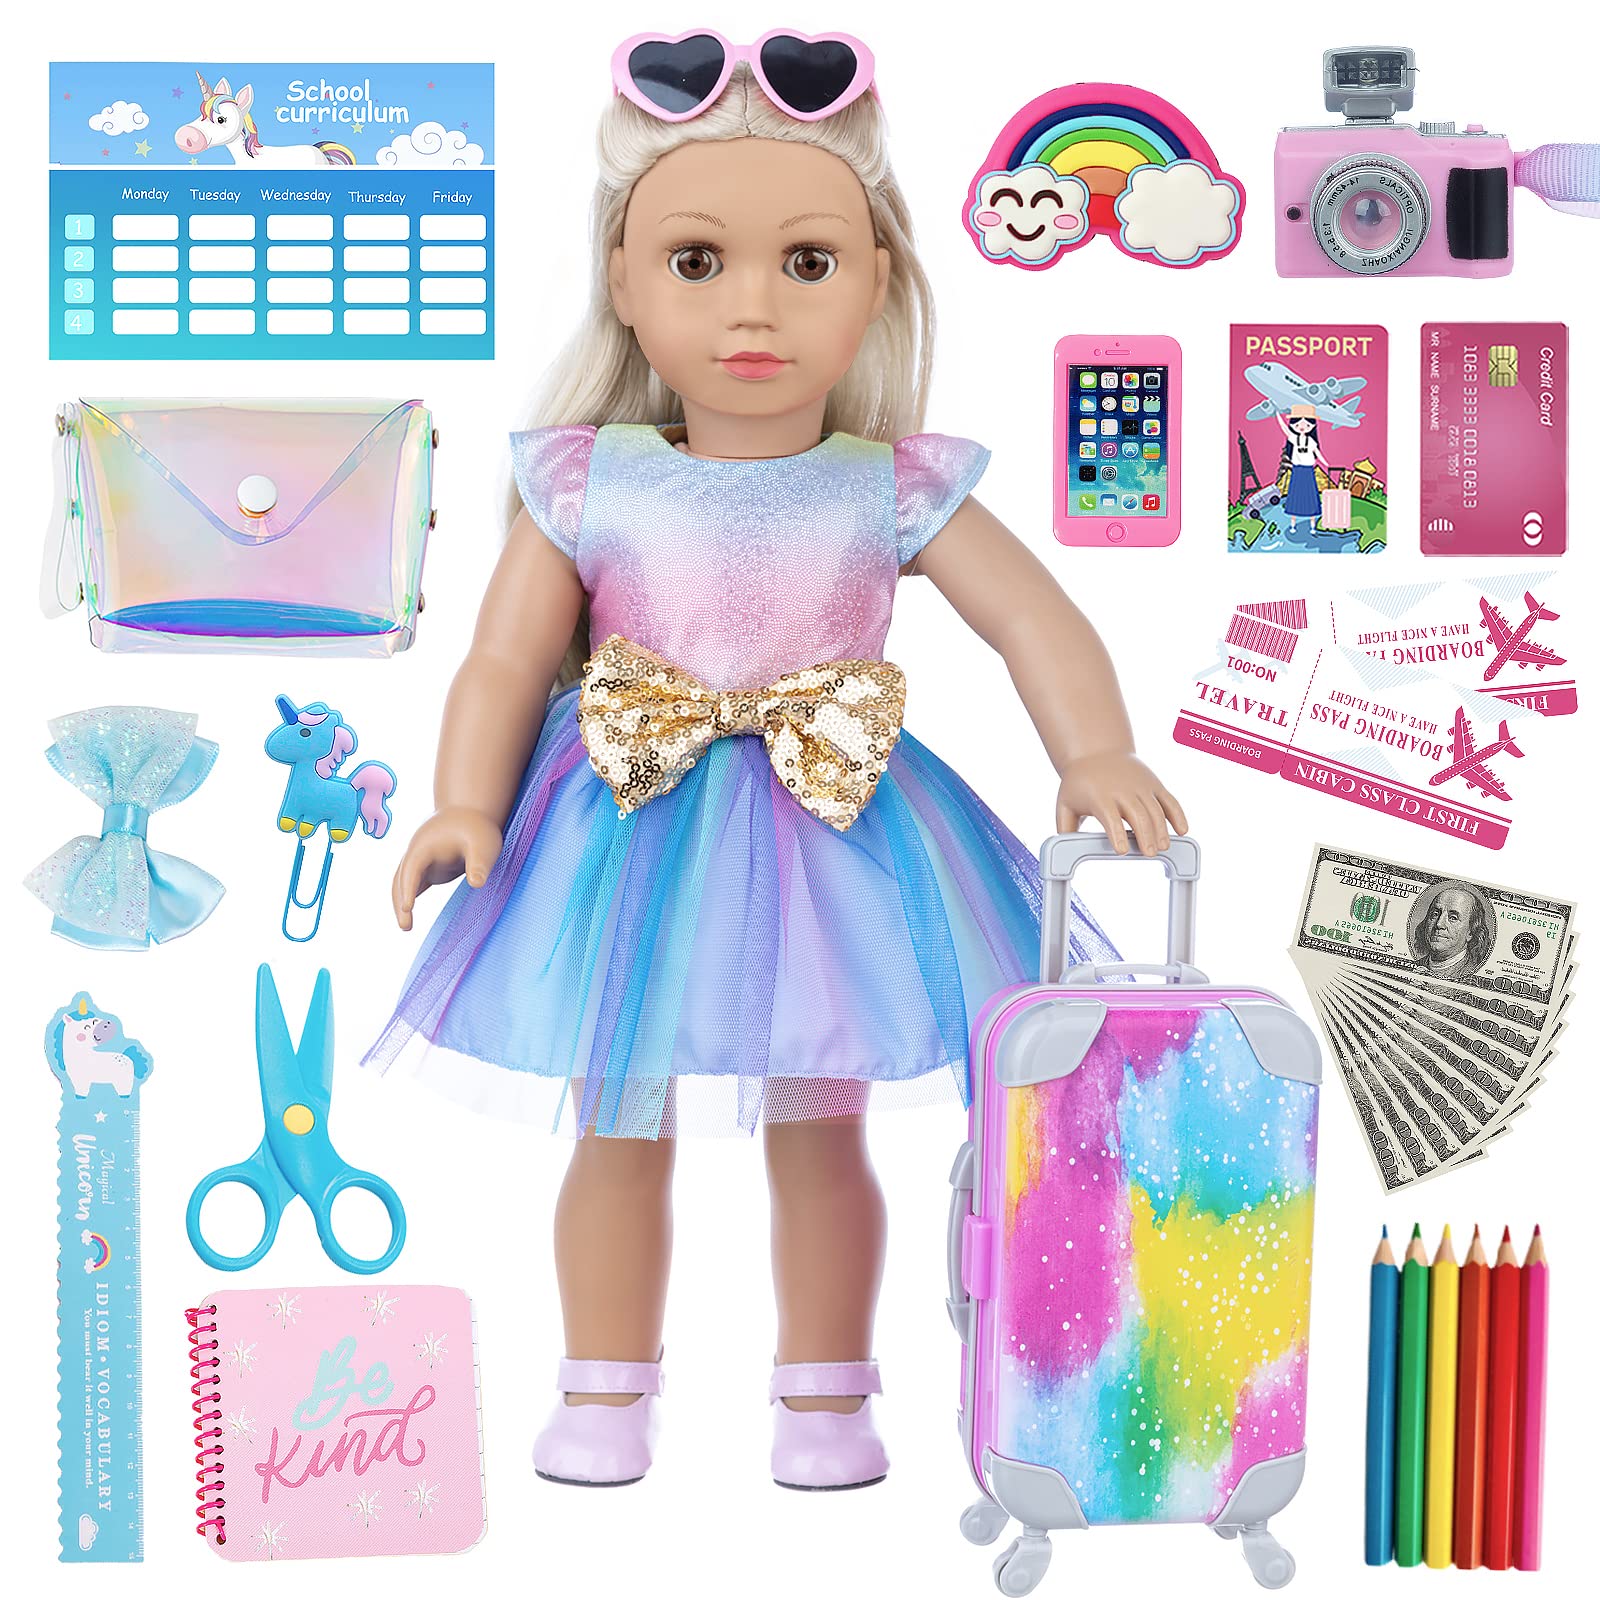 XFEYUE 32 pcs American Doll Clothes and Accessories 18 Inch Doll Luggage and School Play Set - Suitcase, School Sets, Camera, Handbag, Sungalsses, Fit 18 inch Doll